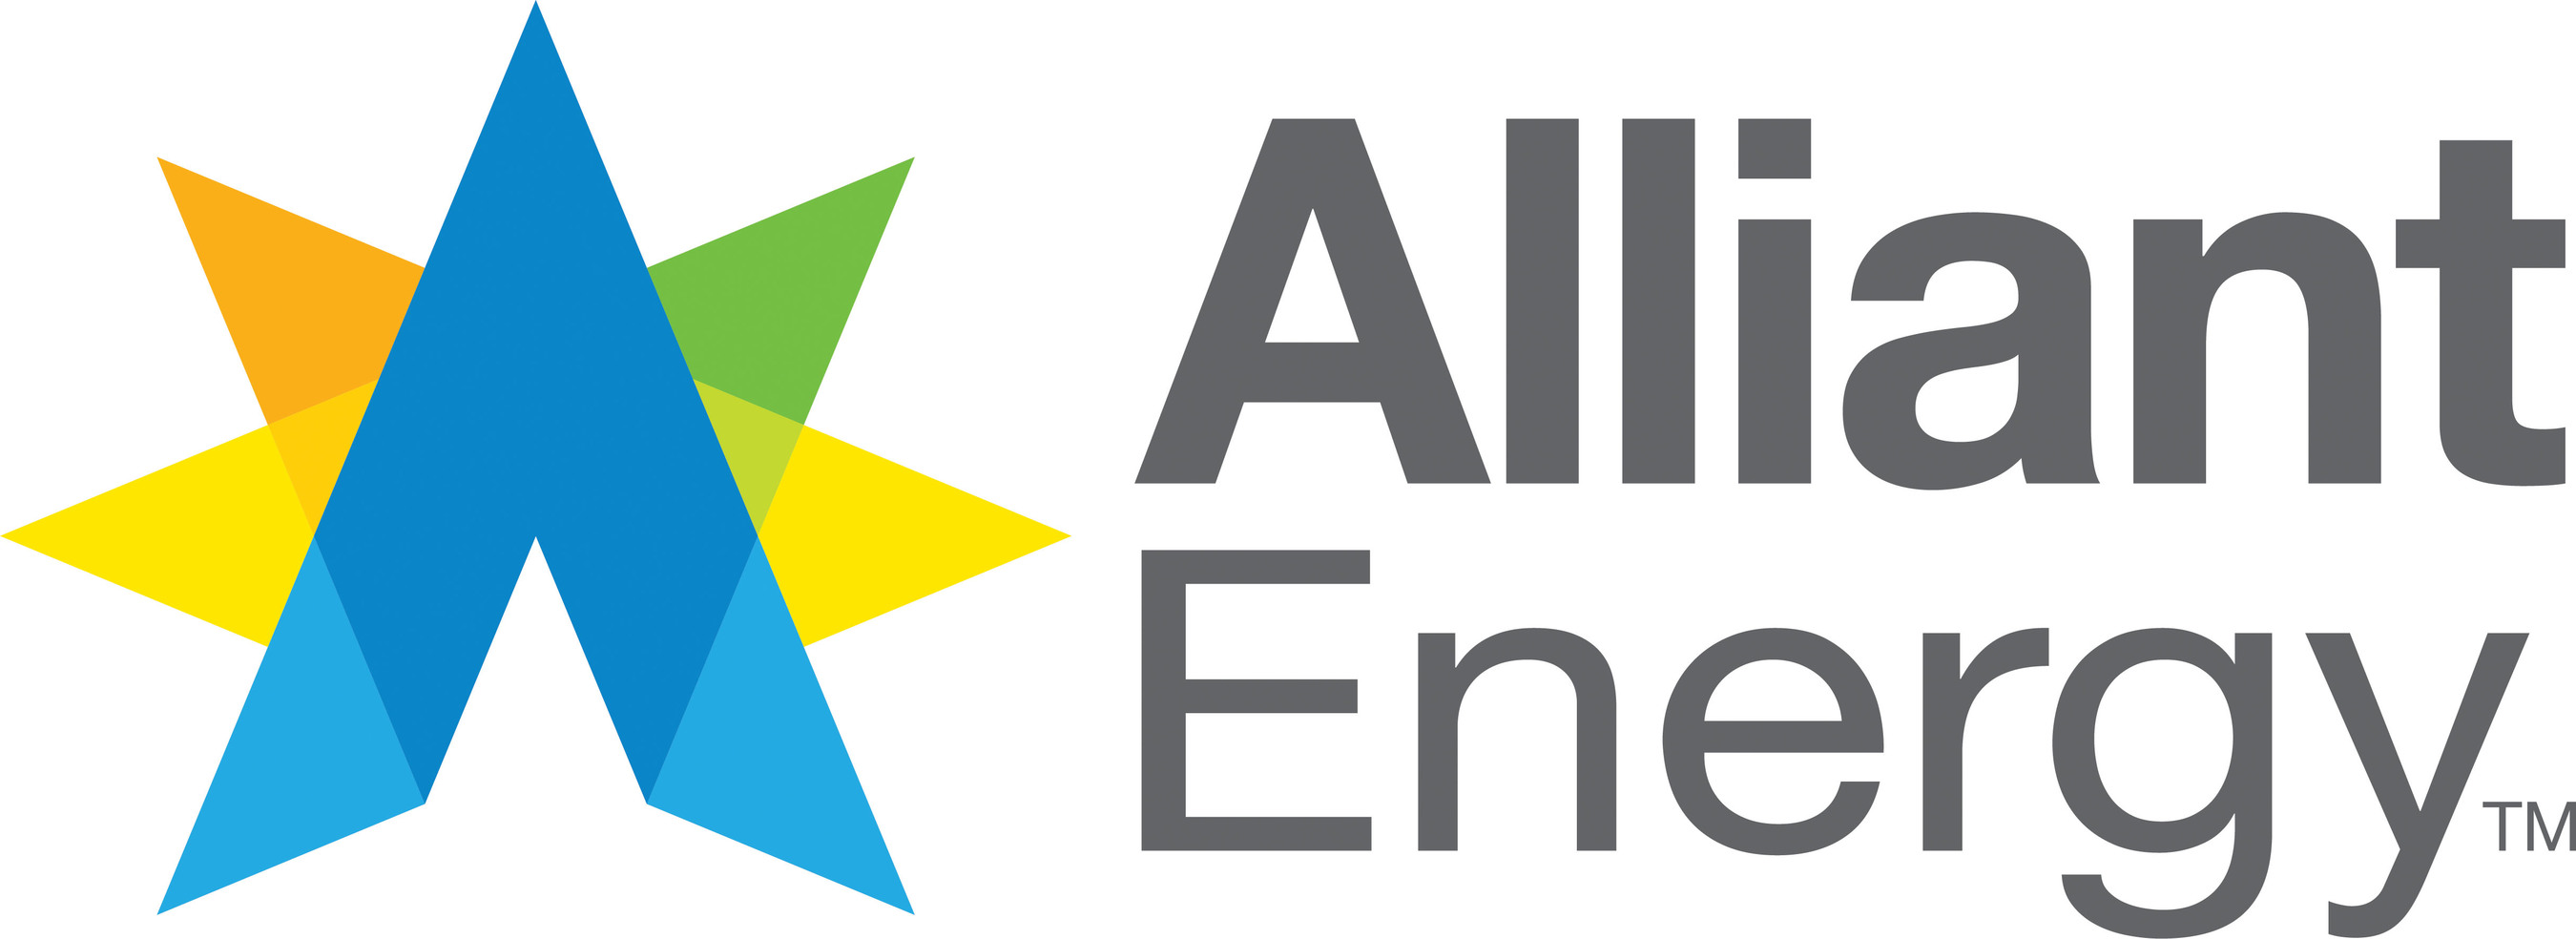 Alliant Energy is the parent company of two public utility companies--Interstate Power and Light Company (IPL) and Wisconsin Power and Light Company (WPL)--and of Alliant Energy Resources, Inc.